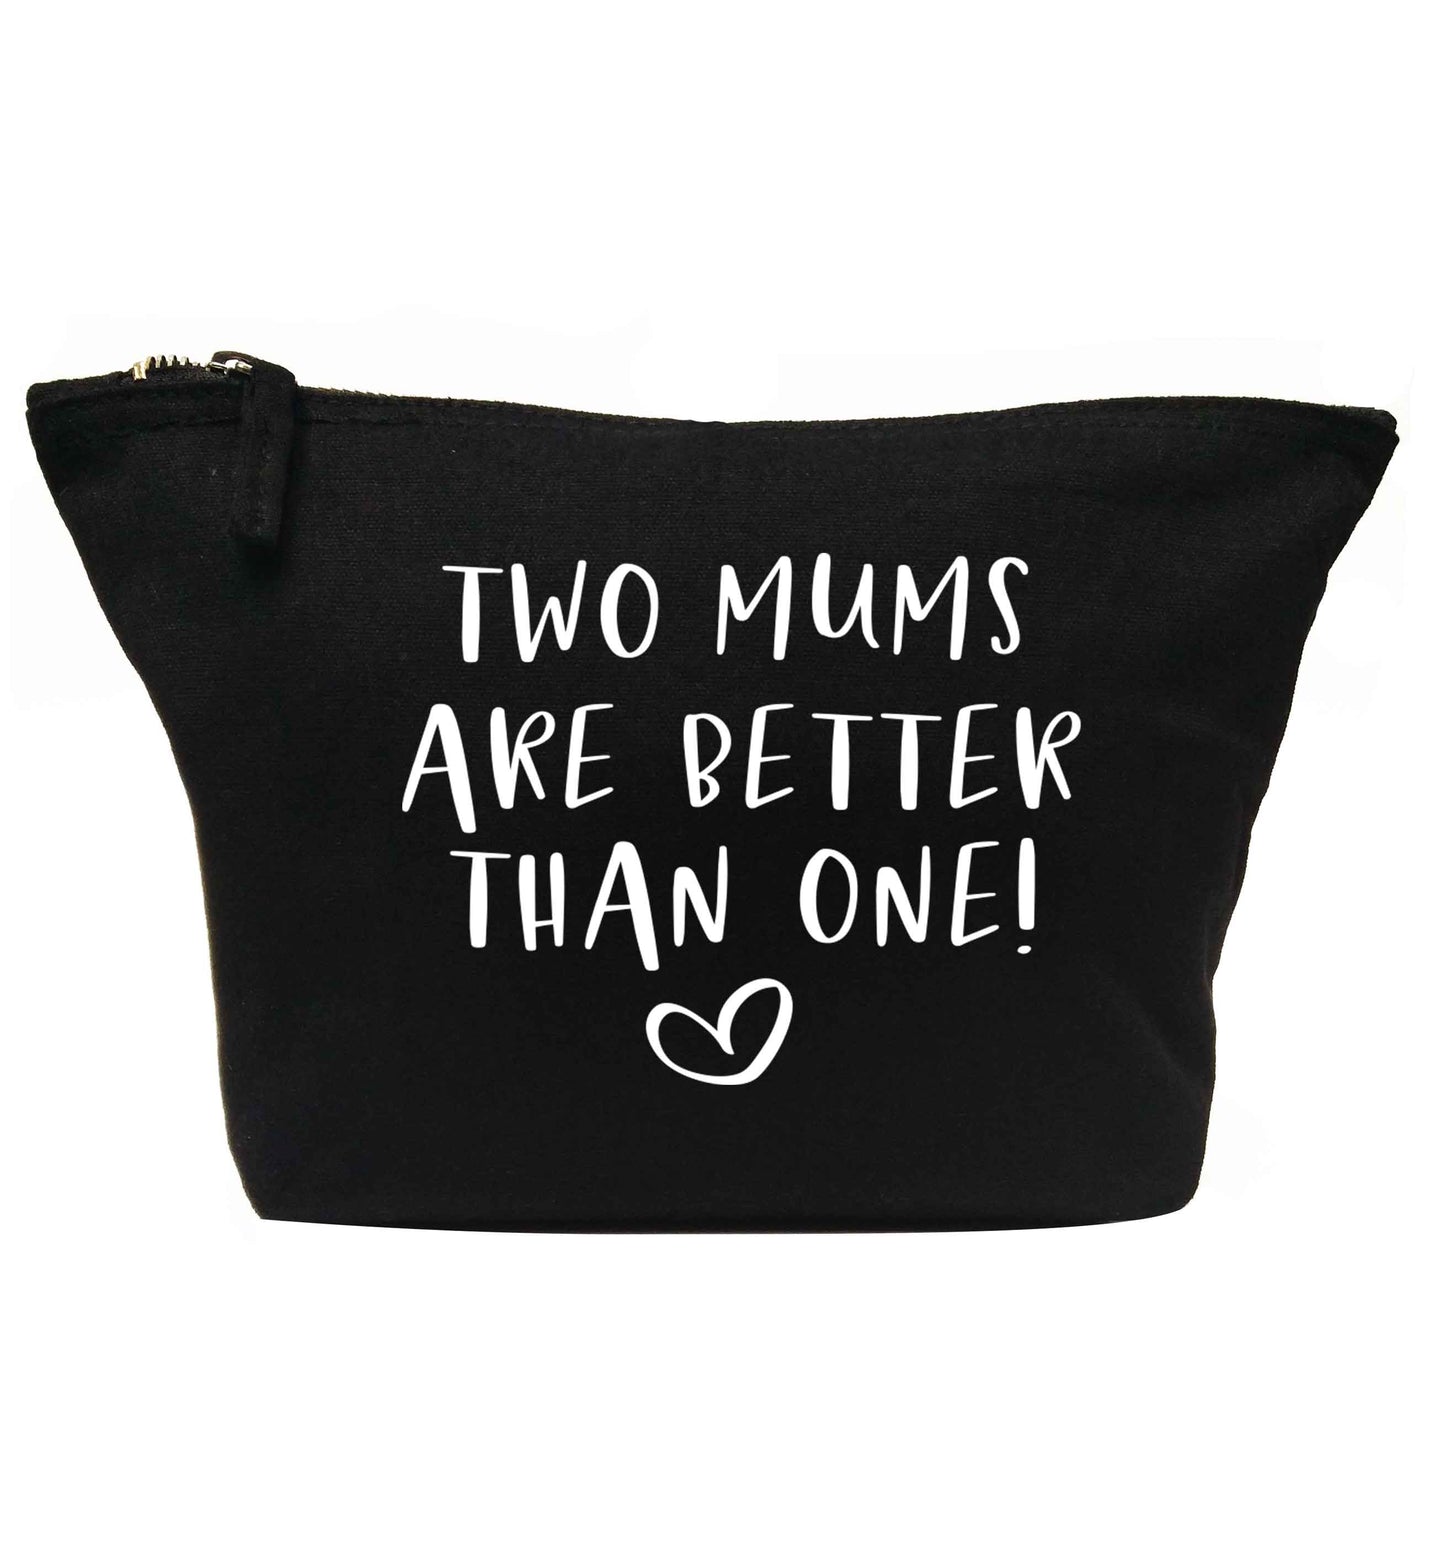 Two mums are better than one | Makeup / wash bag